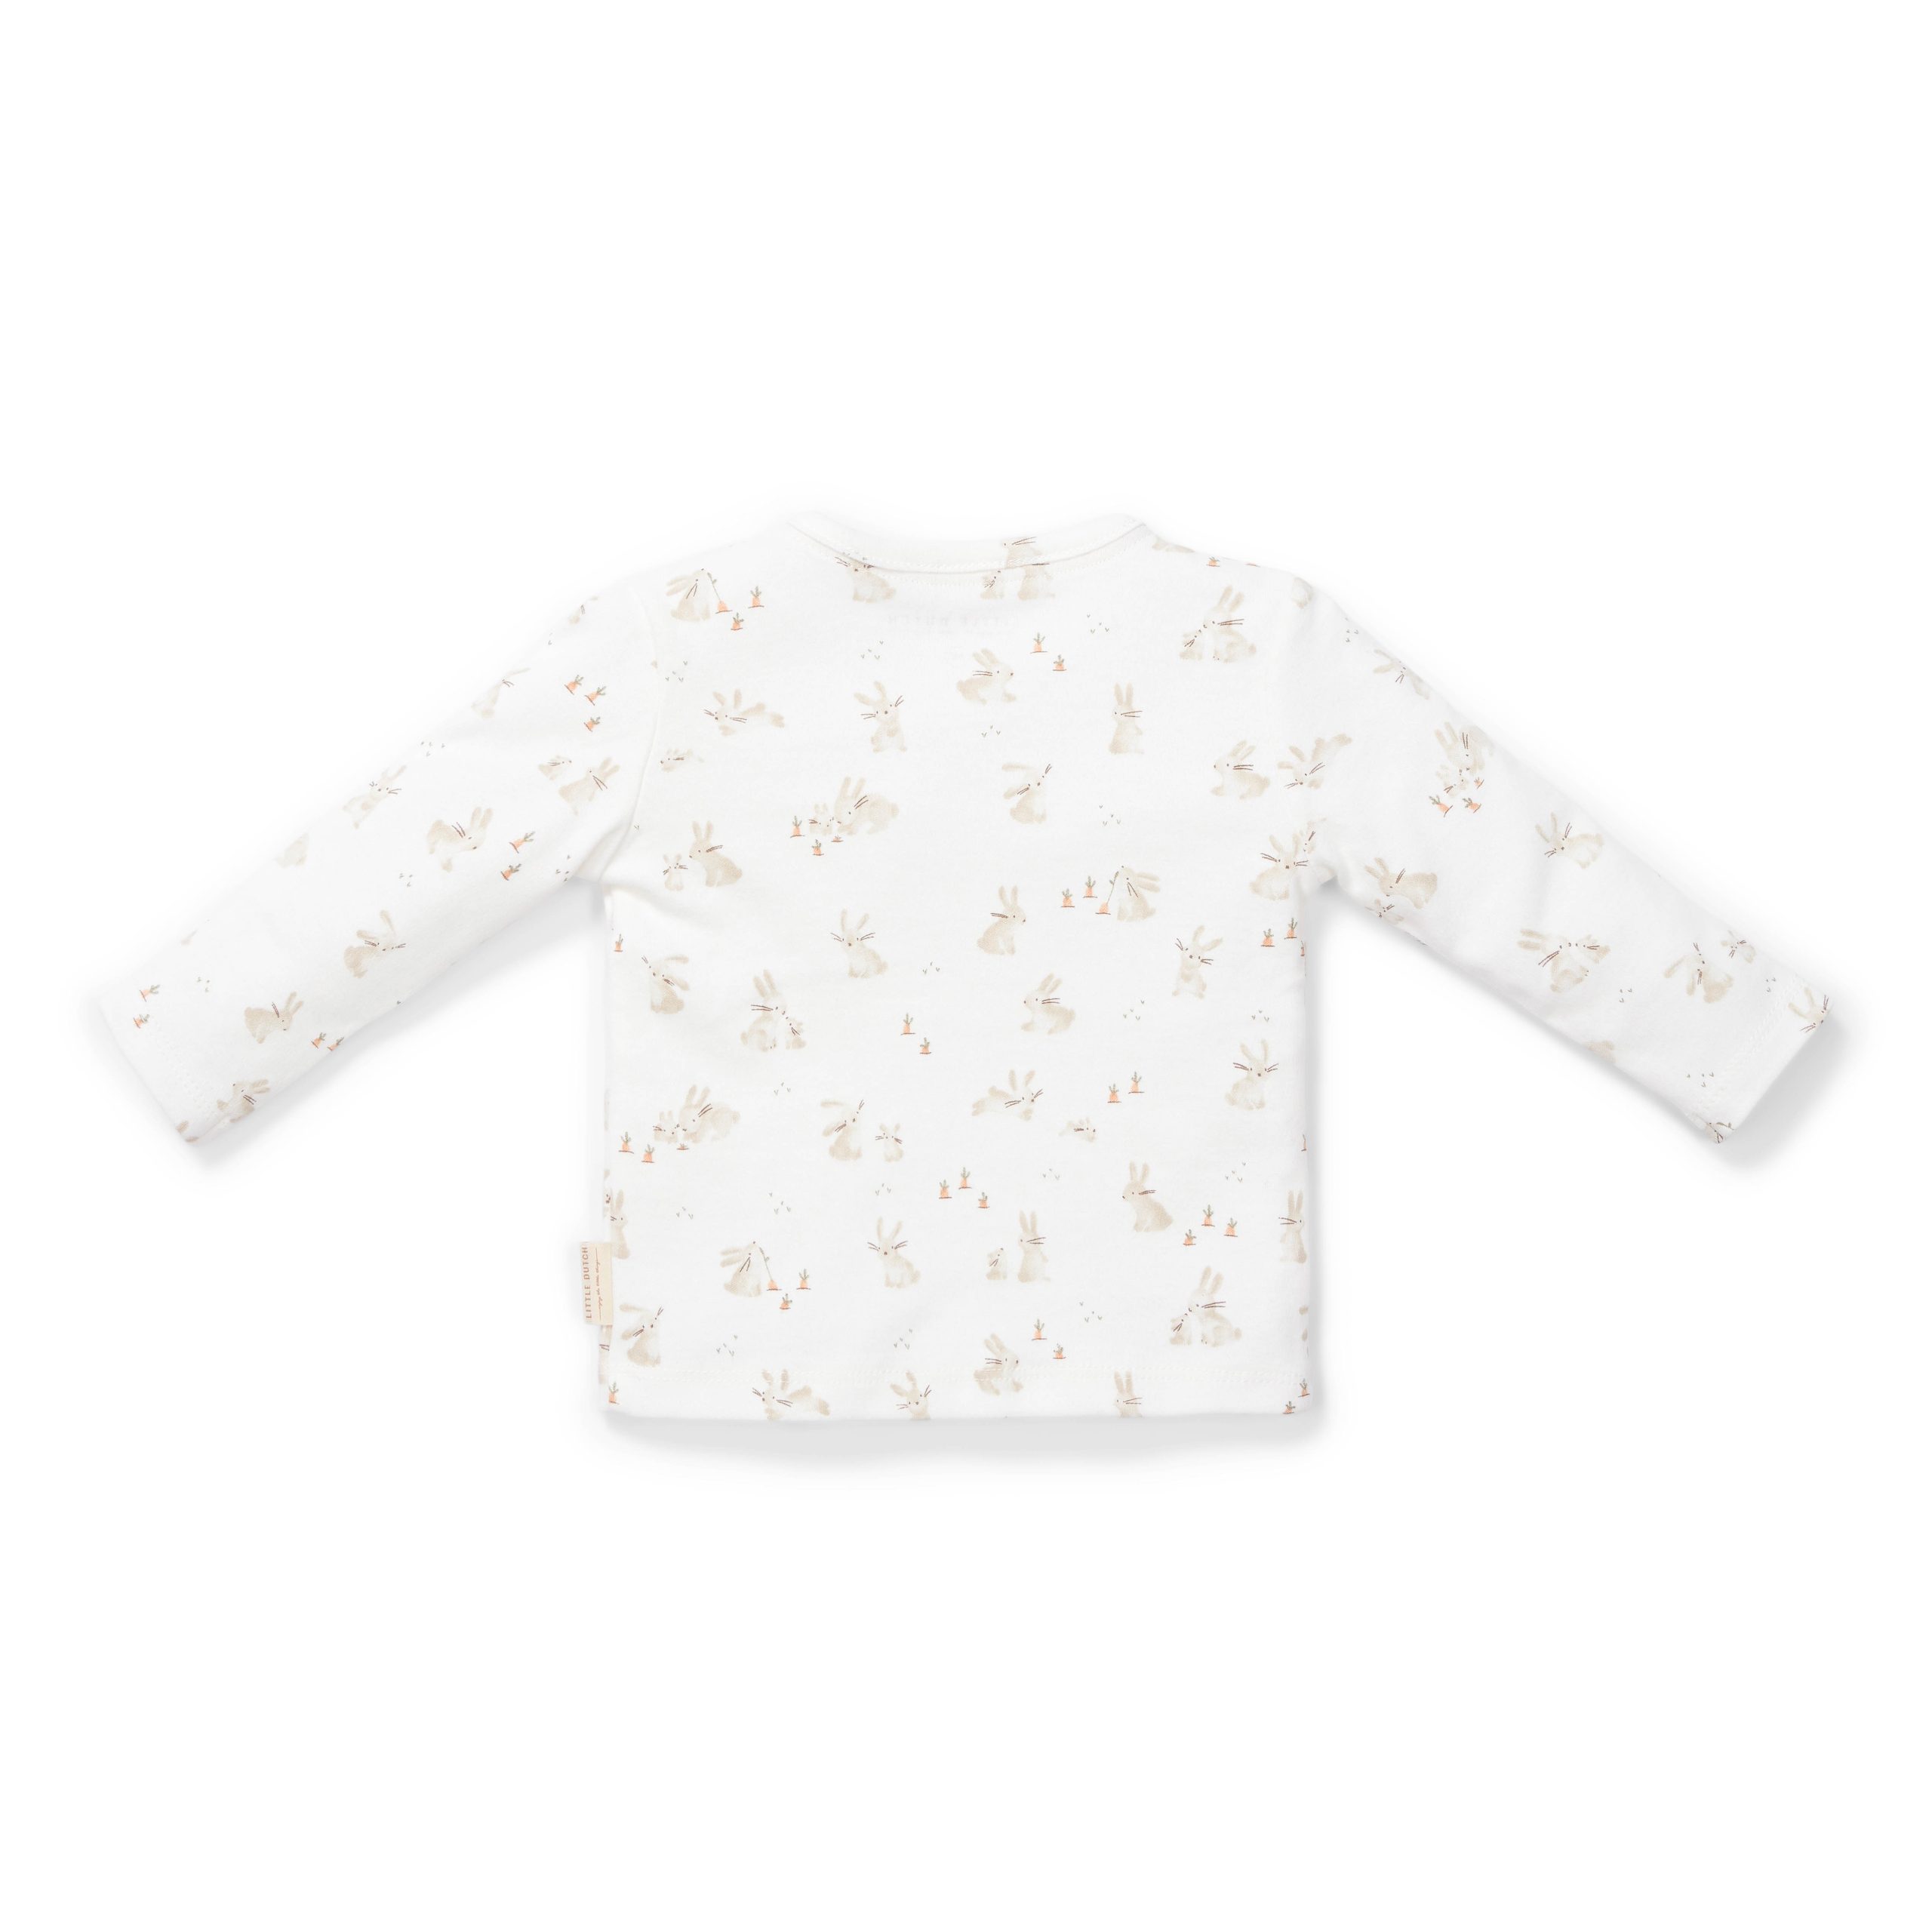 CL24221001 – CL24221002 – CL24221003 – CL24221004 – CL24221005 – CL24221006 – T-shirt long sleeves Baby Bunny – New Born Naturals Bunny (2)